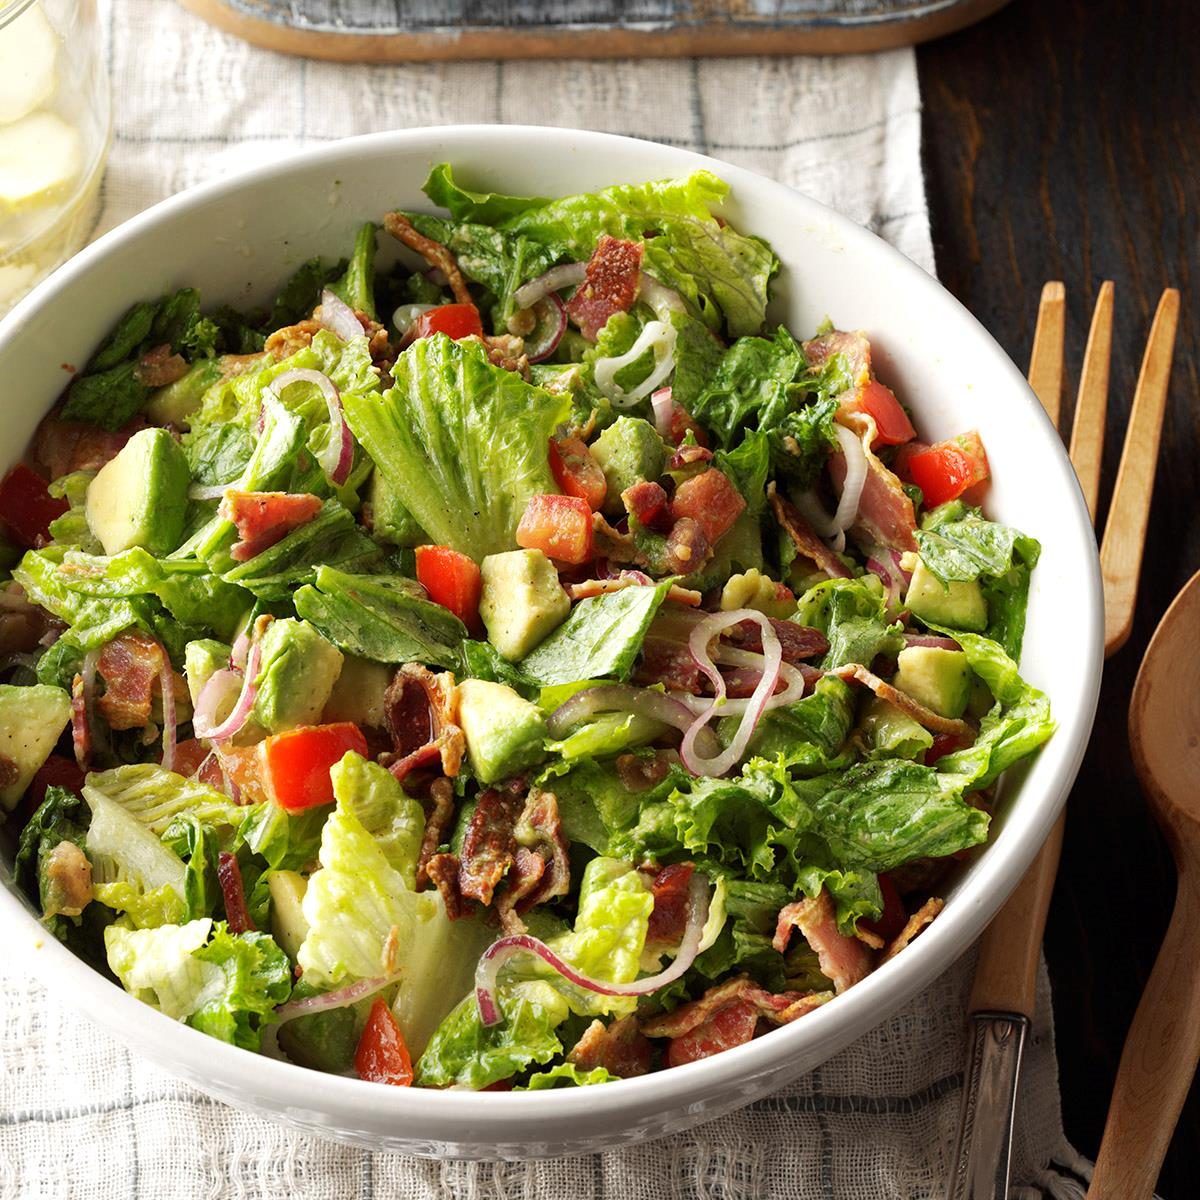 <p>The fresh blend of avocados, tomatoes, red onion and greens in my salad gets additional pizazz from crumbled bacon and a slightly spicy vinaigrette. —Lori Fischer, Chino Hills, California</p> <div class="listicle-page__buttons"> <div class="listicle-page__cta-button"><a href='https://www.tasteofhome.com/recipes/guacamole-tossed-salad/'>Go to Recipe</a></div> </div>